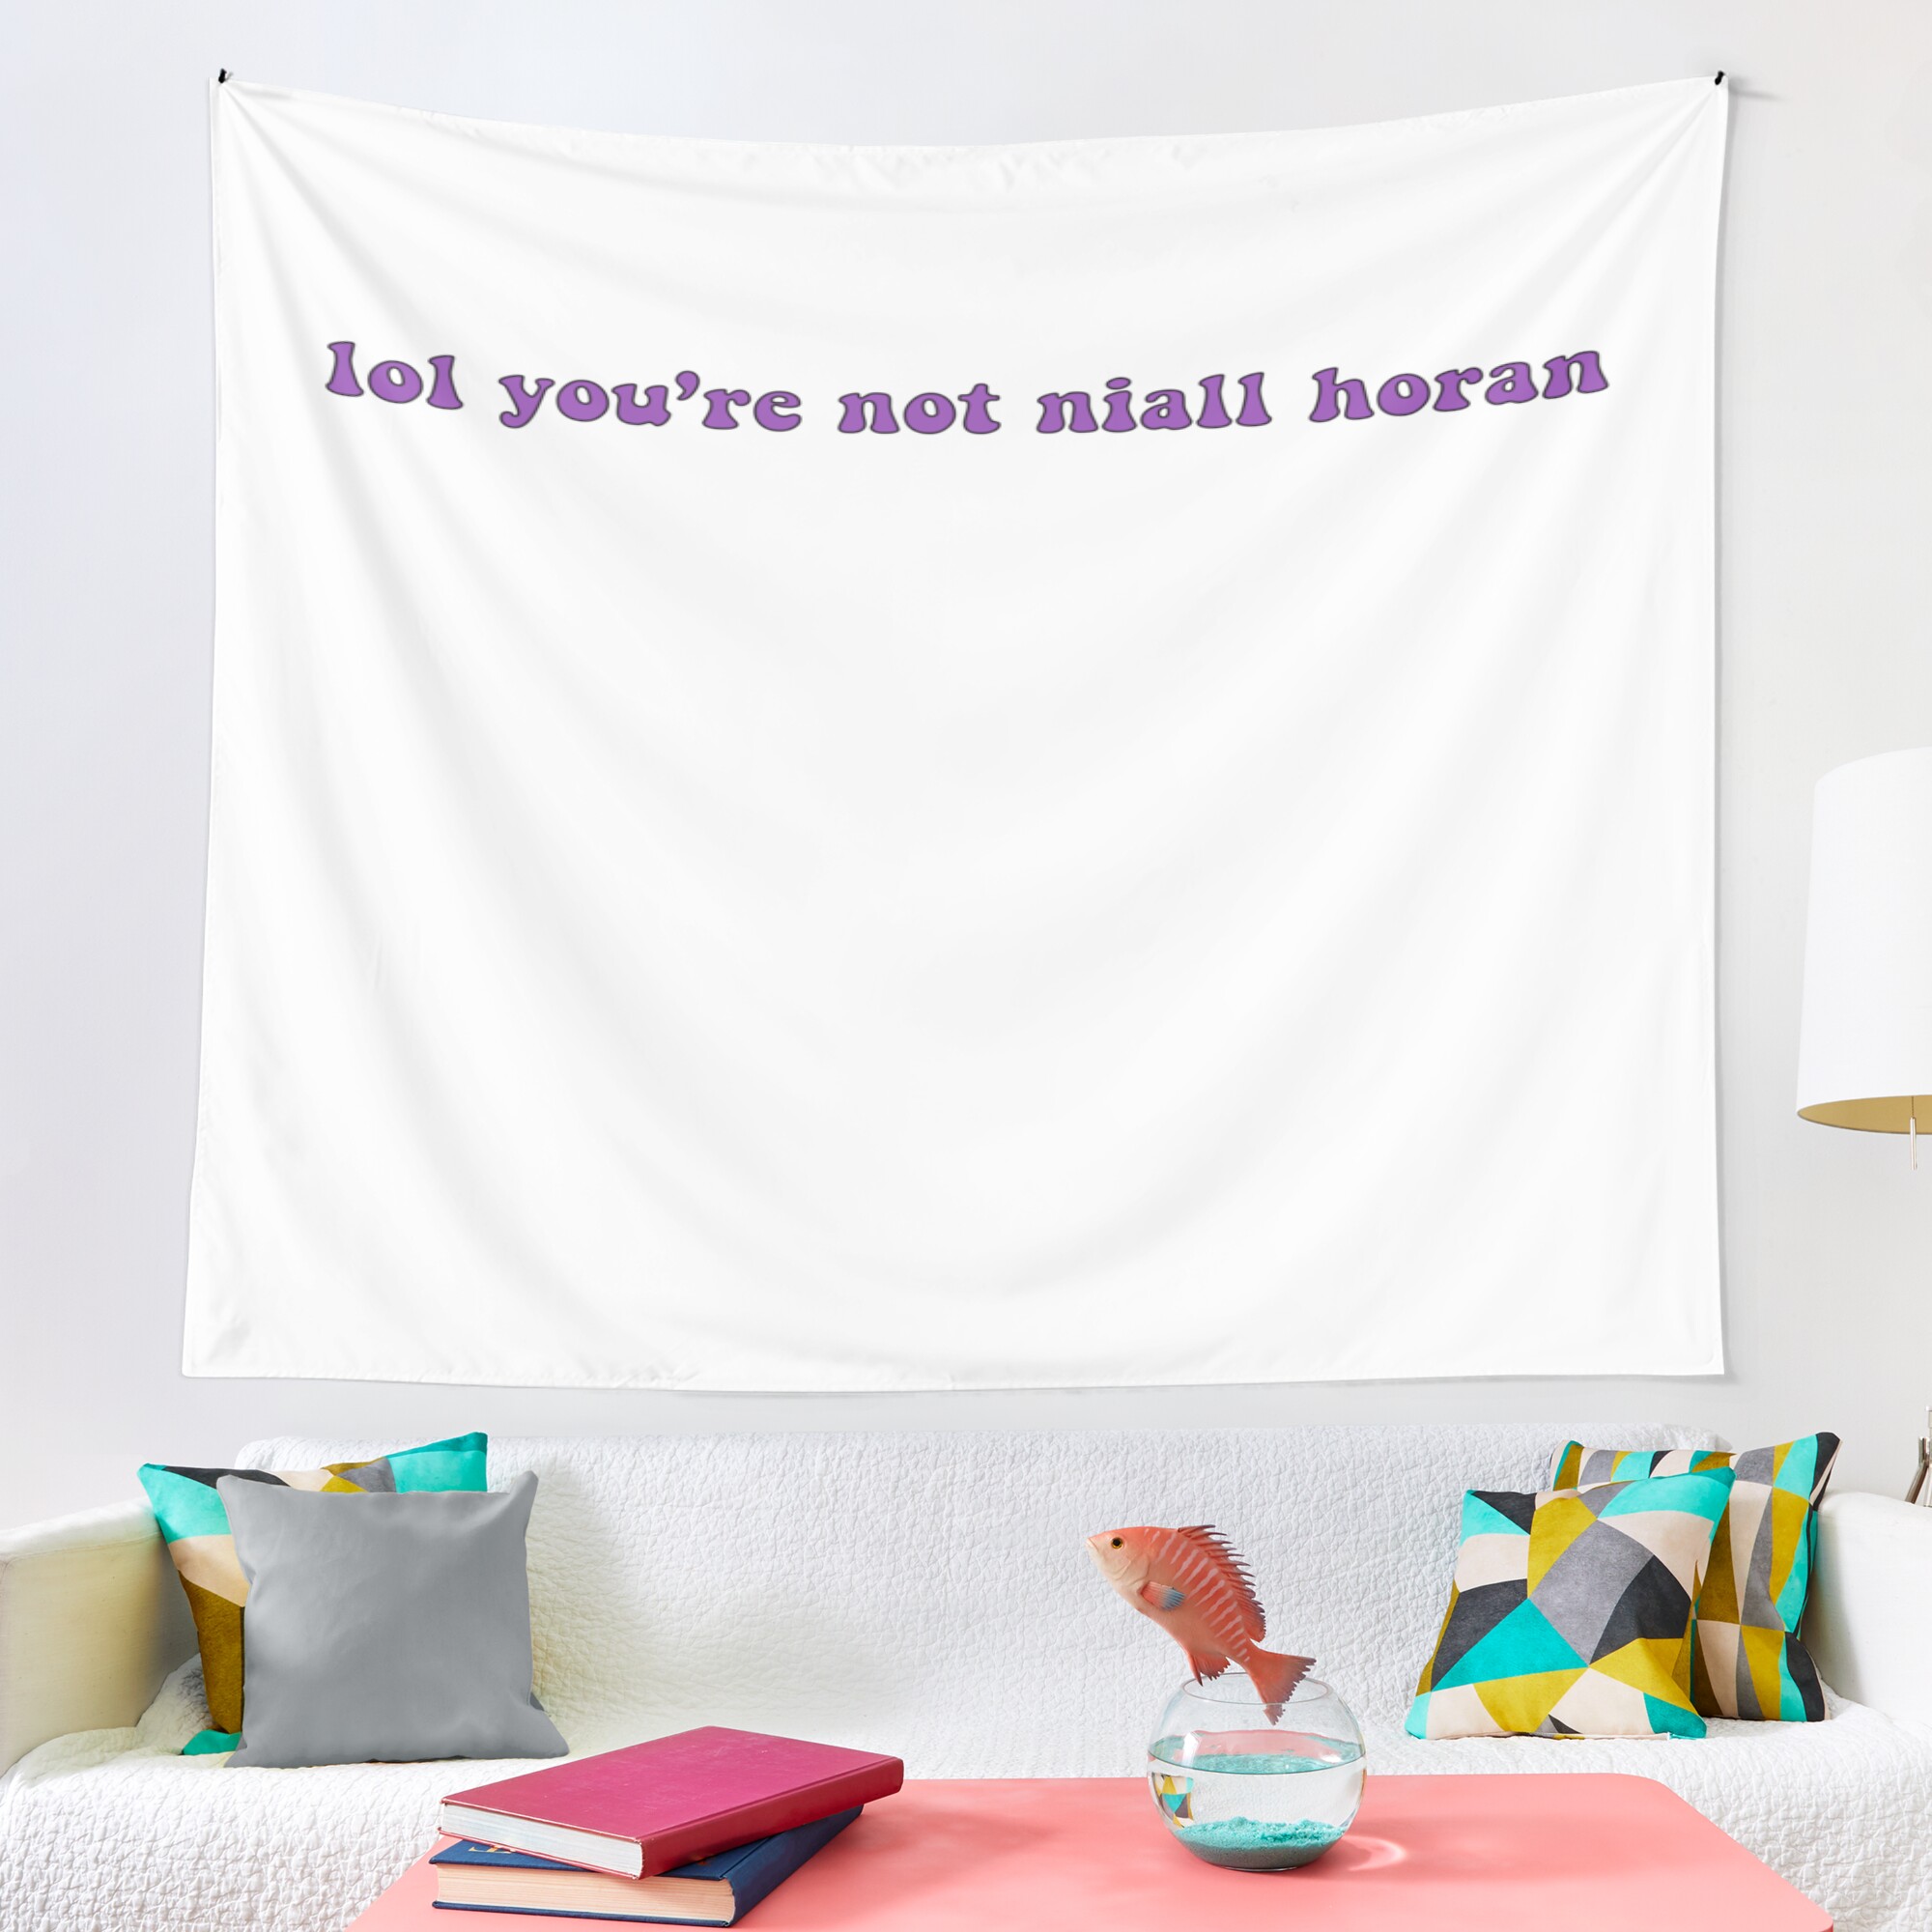 urtapestry lifestyle largesquare2000x2000 13 - Niall Horan Shop